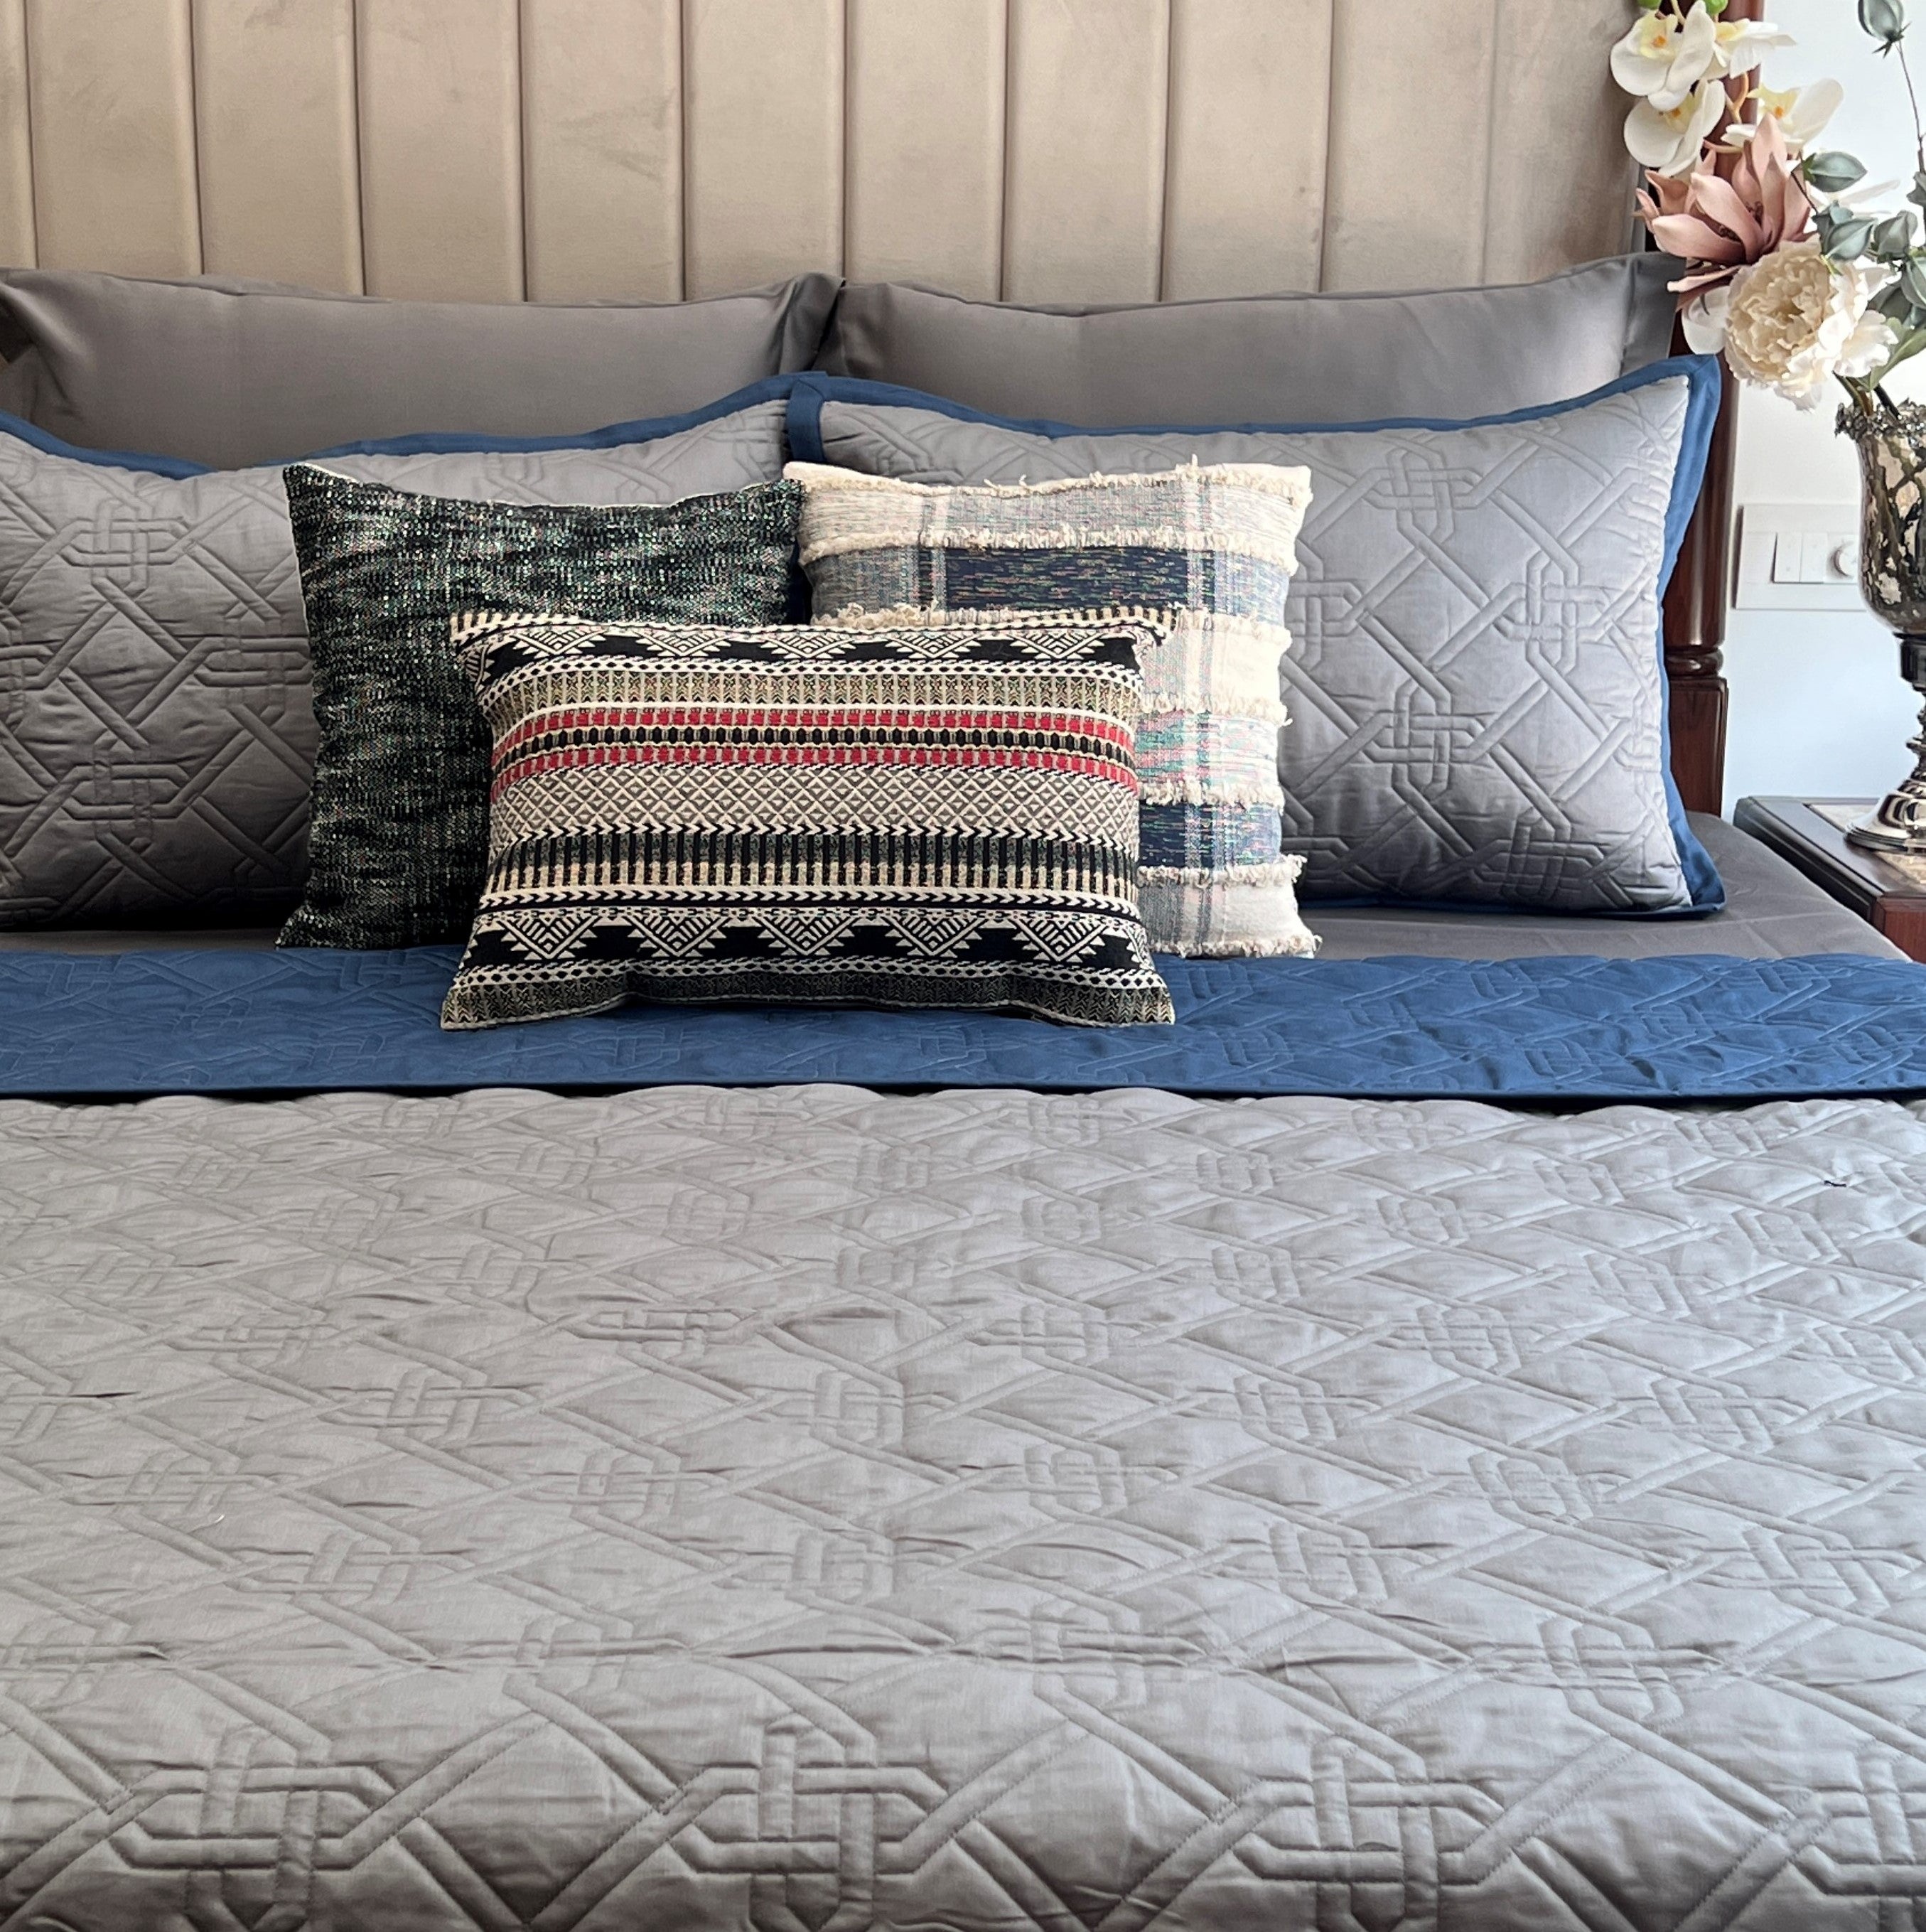 Quilted Navy and Dark Grey Gizmo Reversible Bedspread